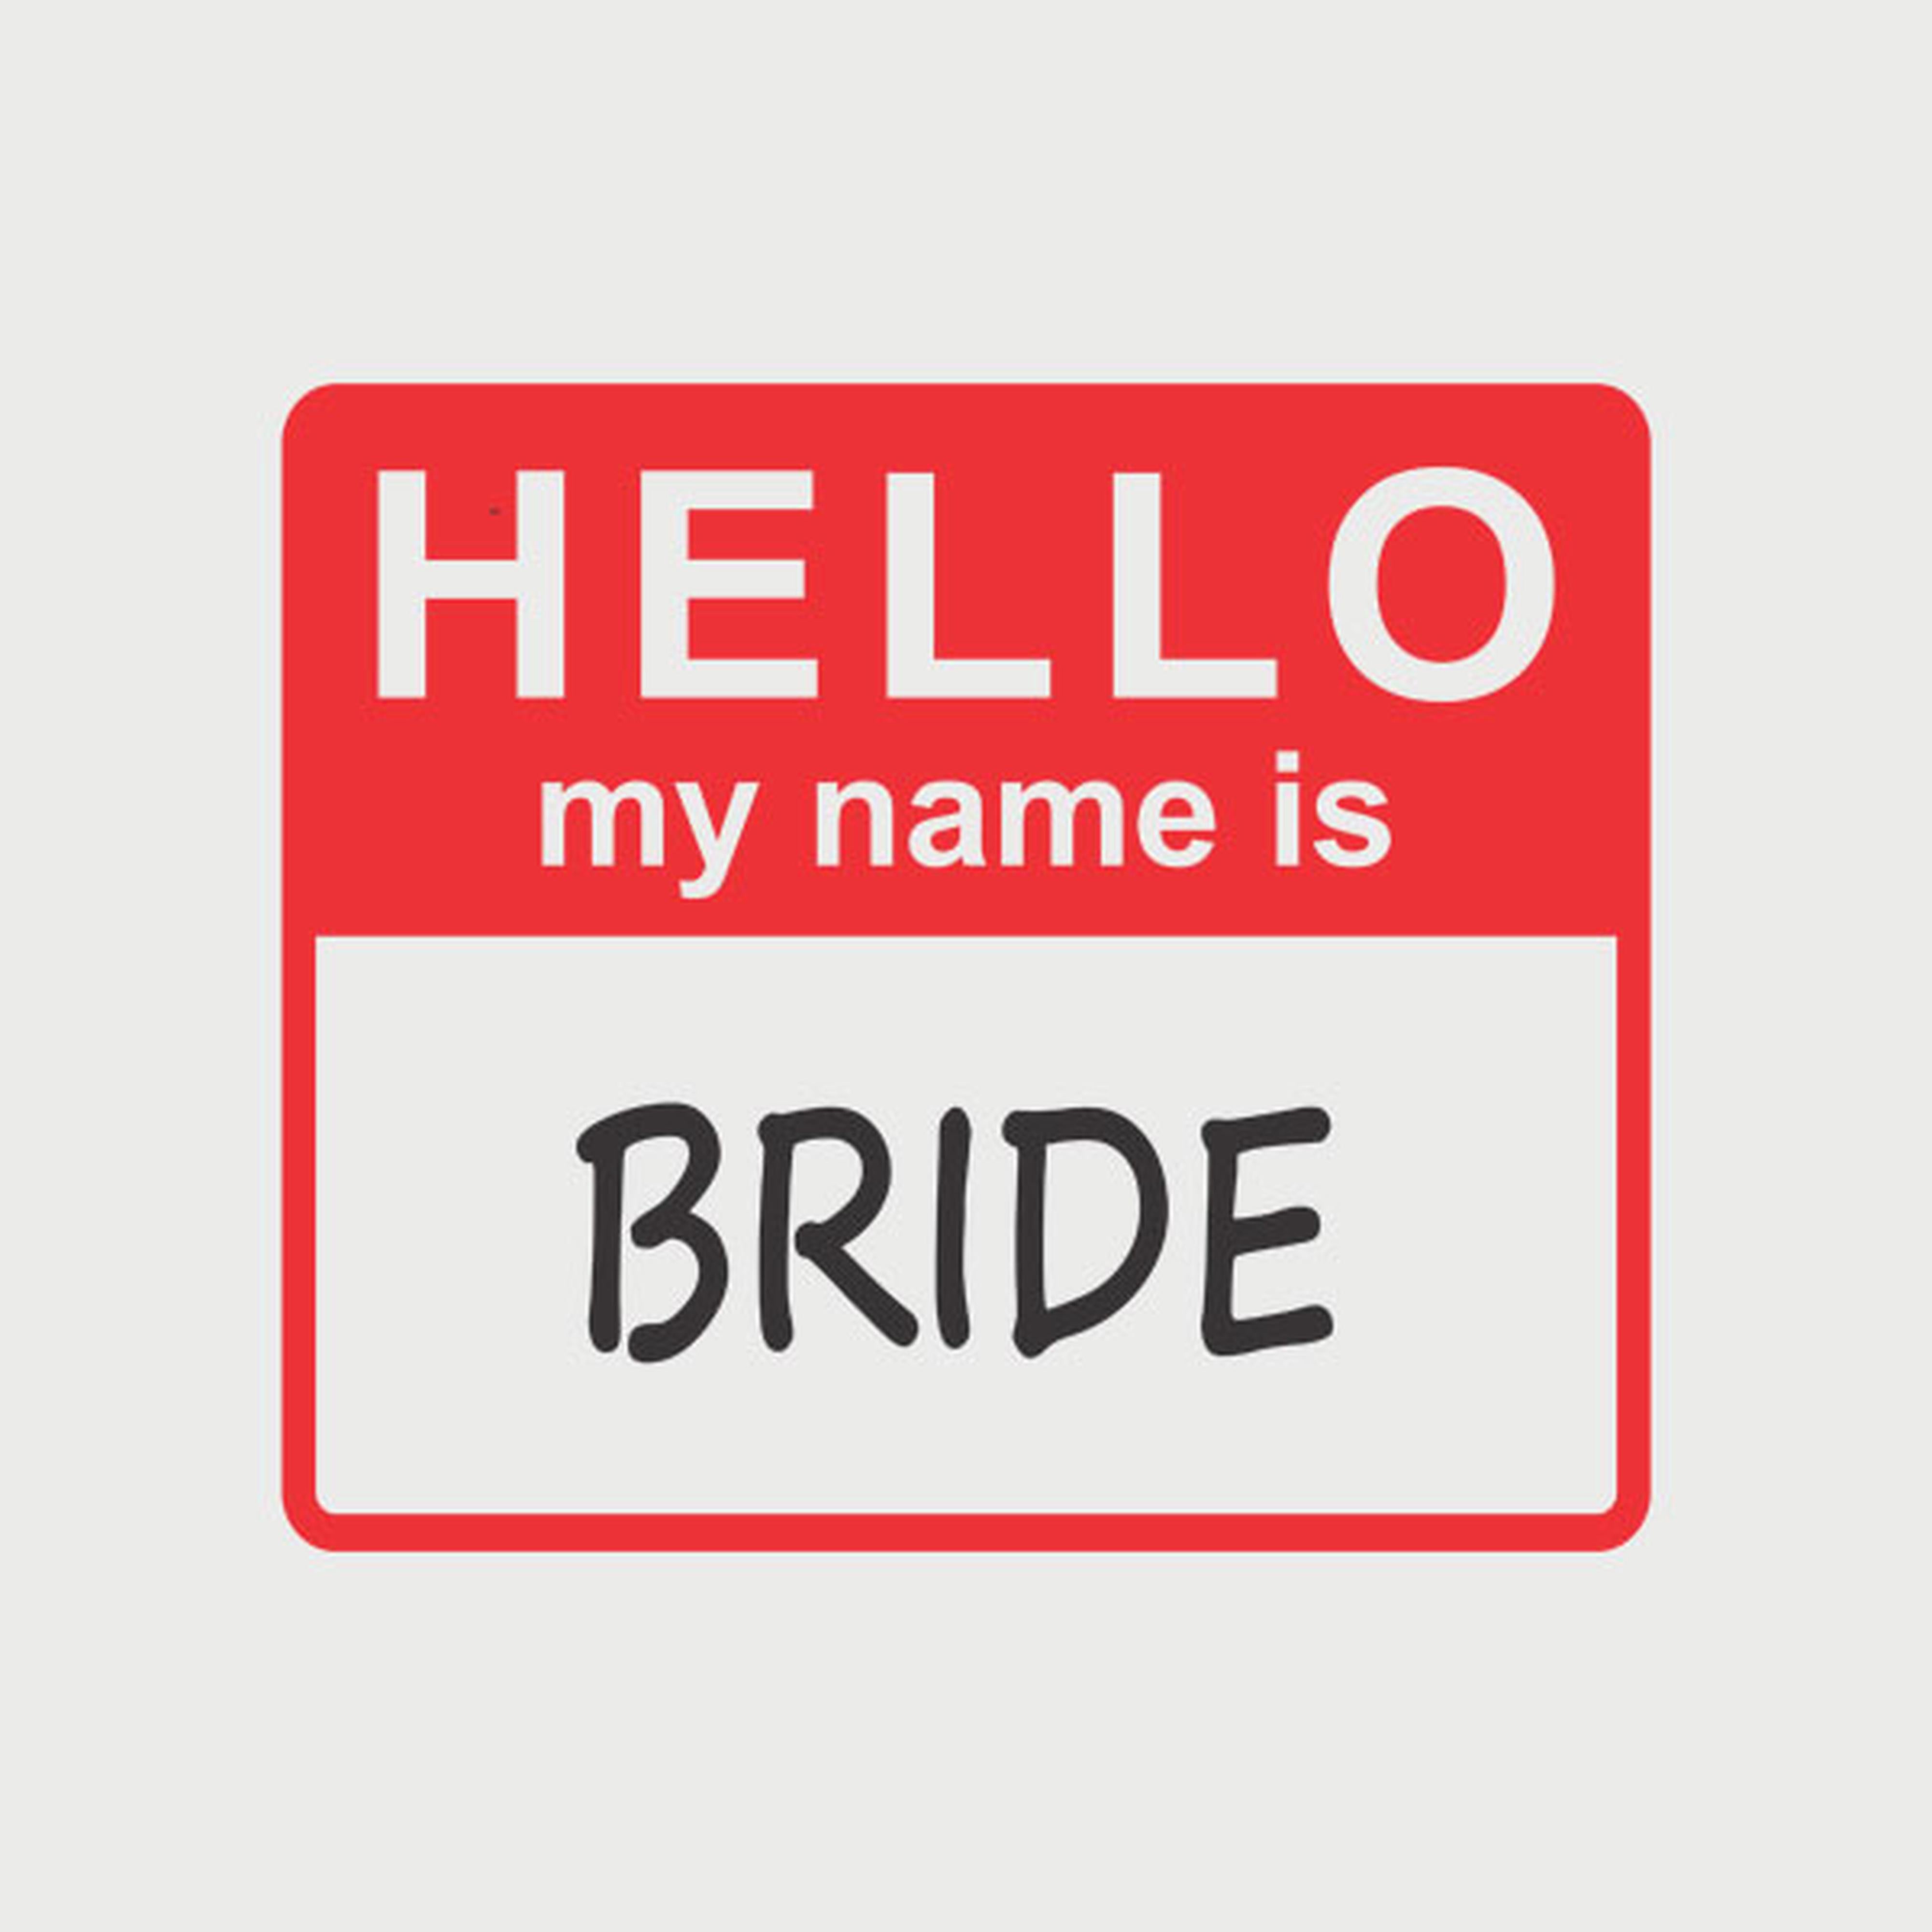 HELLO - My name is bride